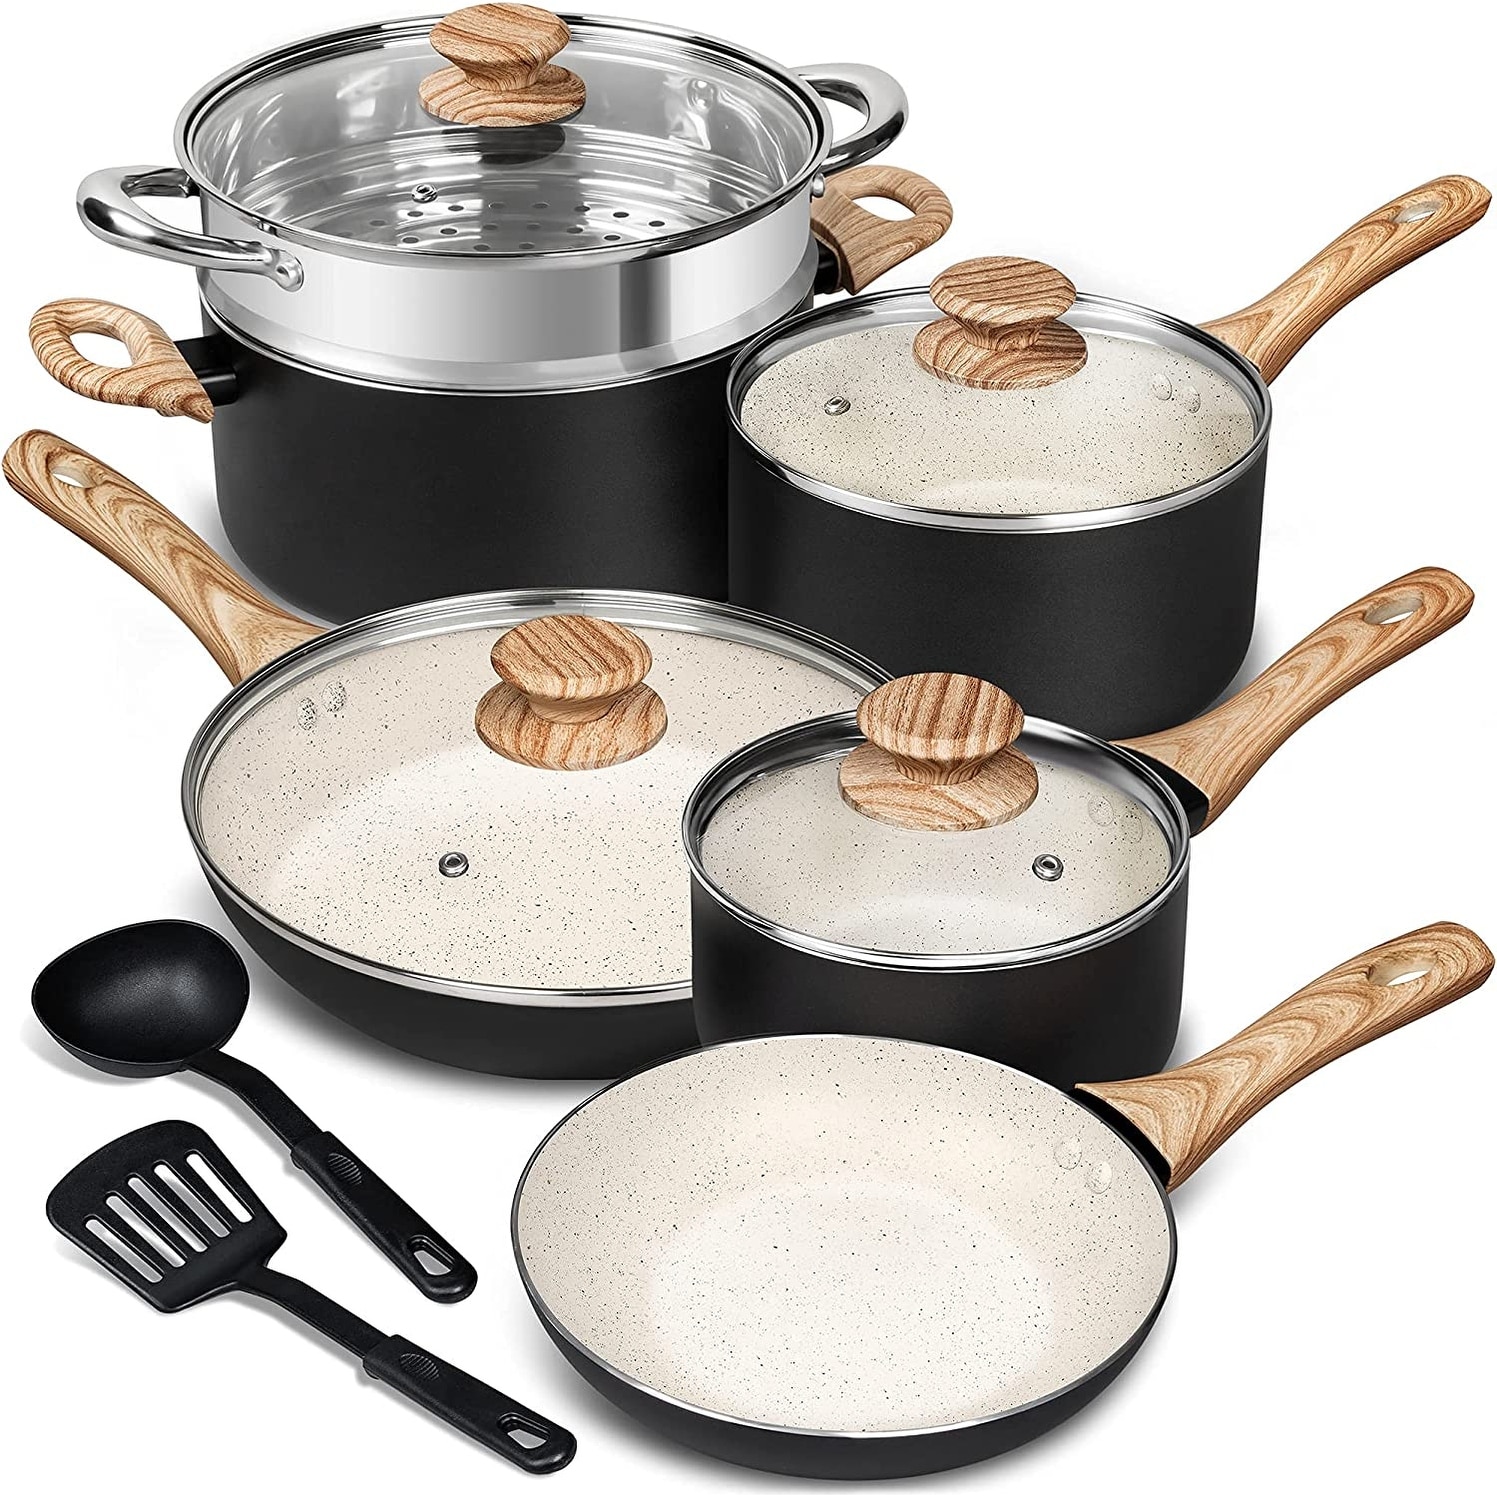 https://ak1.ostkcdn.com/images/products/is/images/direct/13585f29a265b03521904ed220cb28bddbd55f01/Pot-and-Pan-Set-Nonstick%2C-12-Pcs-Kitchen-Cookware-Sets-with-Bakelite-Handle%2C-Non-Toxic-Cookware-Set-Induction-Compatible.jpg